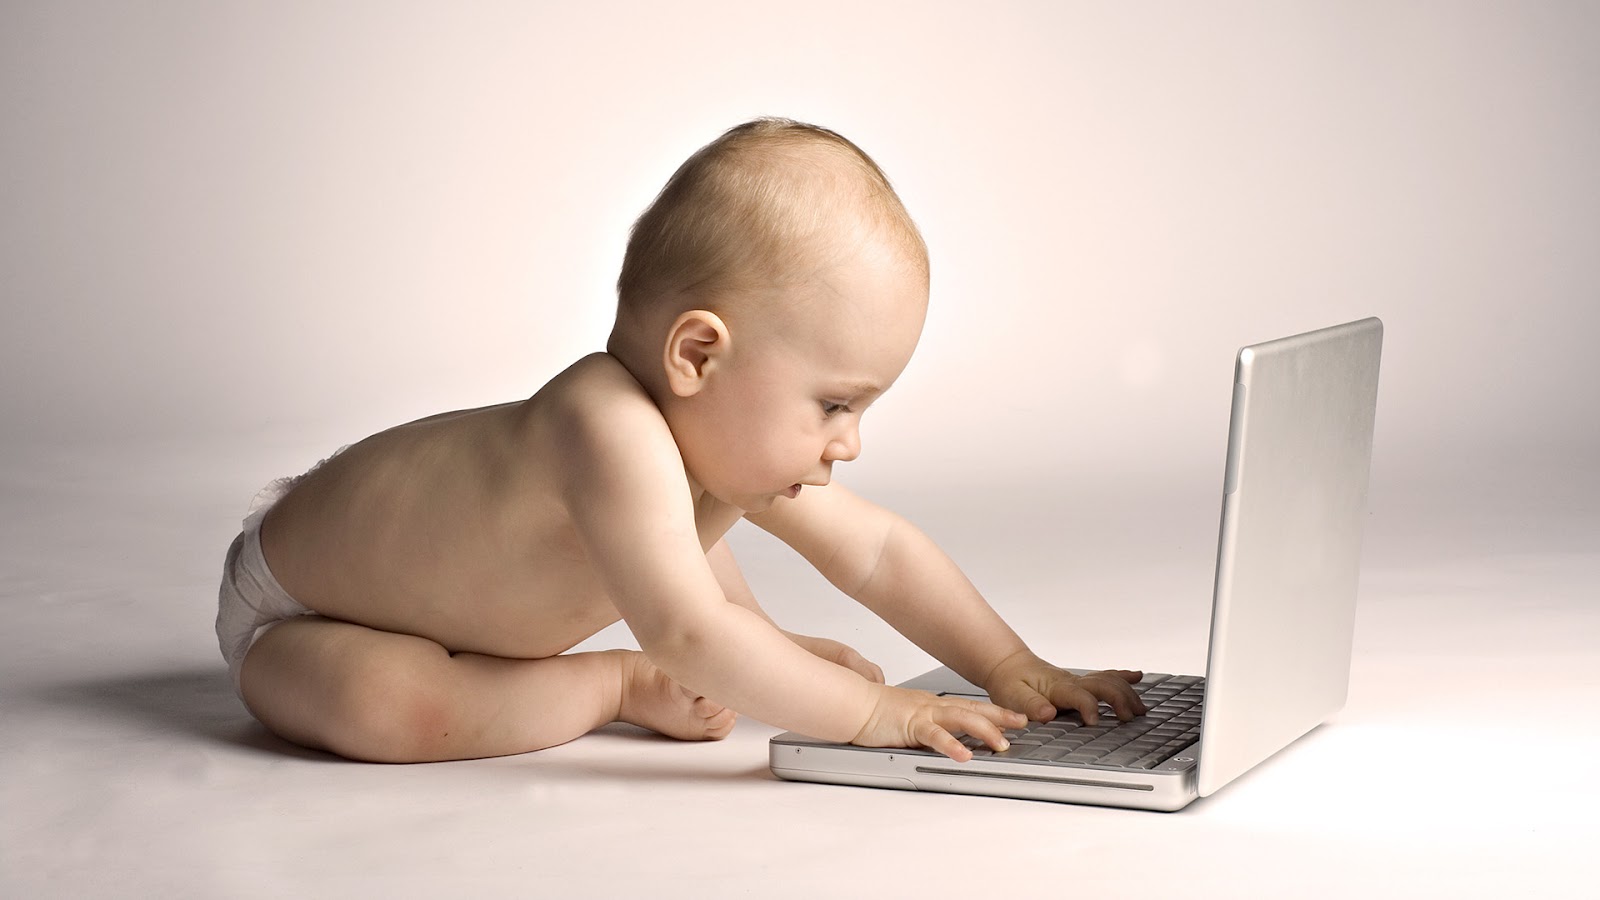 Baby Wallpaper Hd 1080p ~ Wallpaper Hd 1080p - Baby With Laptop , HD Wallpaper & Backgrounds